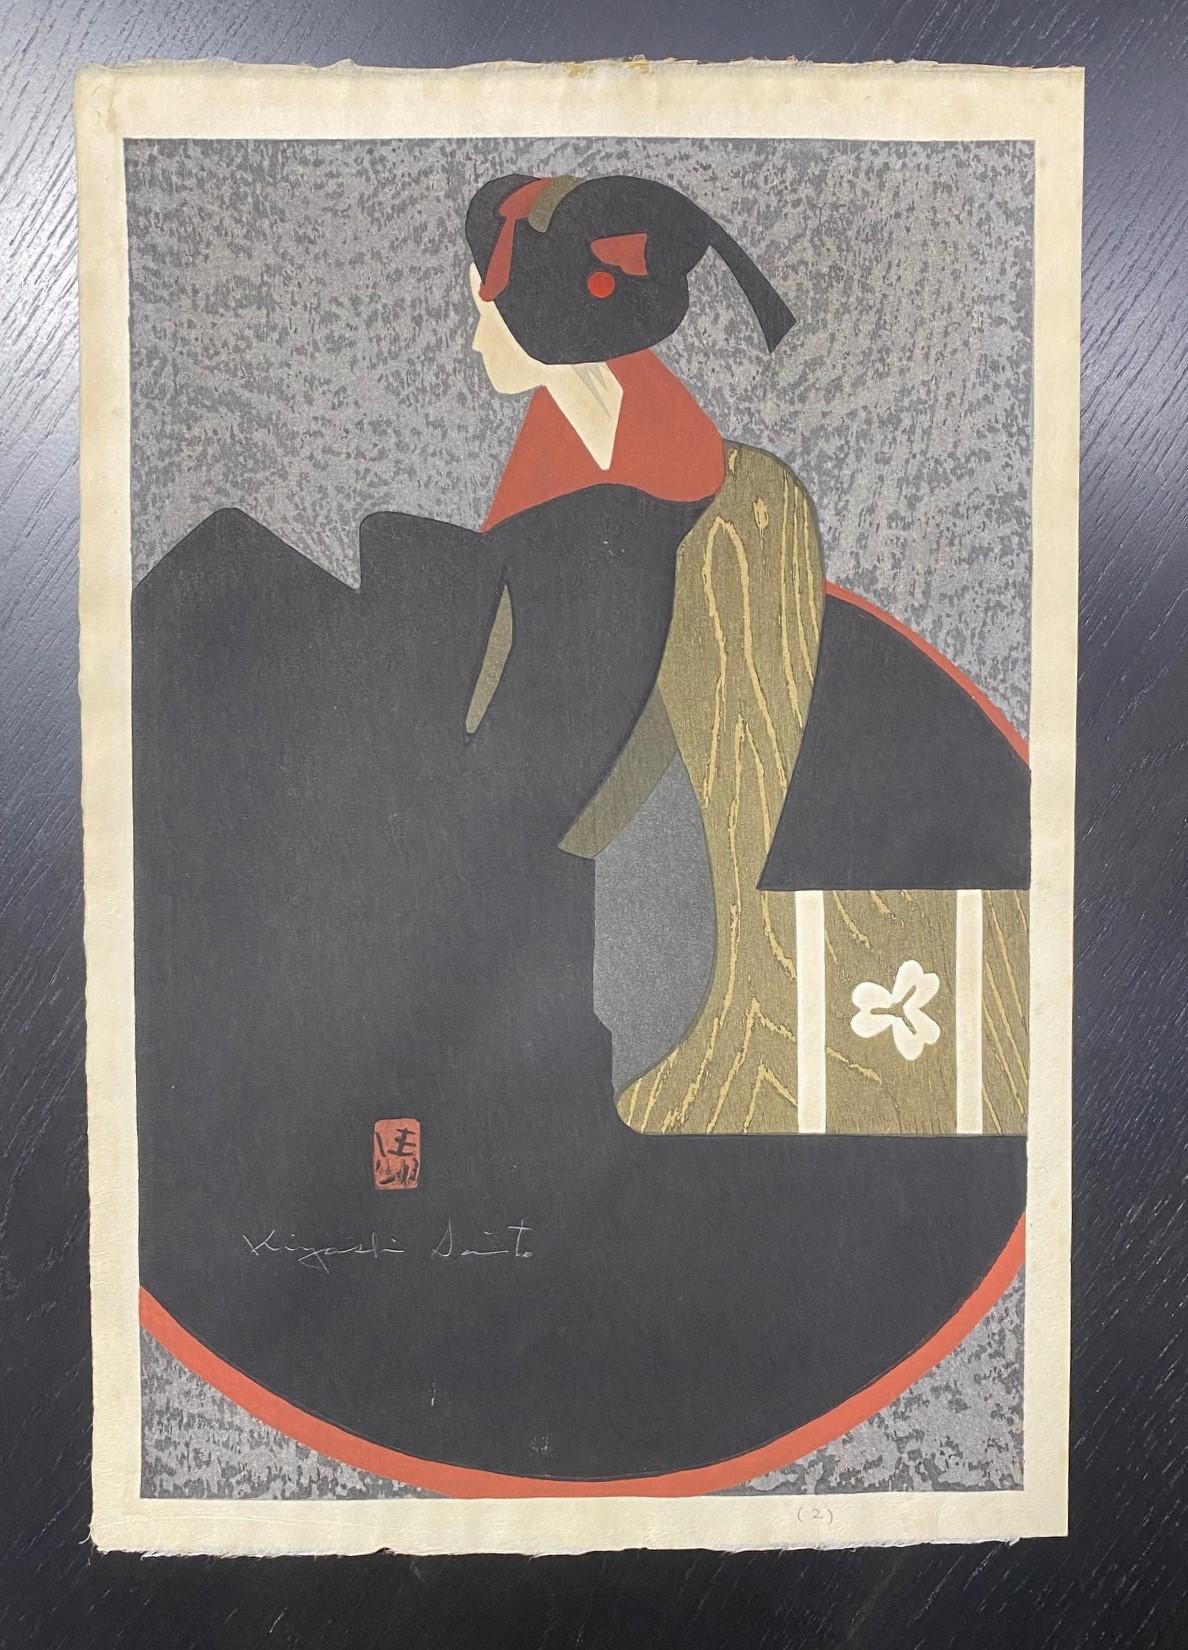 A beautifully and serenely composed woodblock print by famed Japanese printmaker Kiyoshi Saito. Many consider Saito to be one of the most important, if not the most important, contemporary Japanese printmakers of the 20th century. This print, titled